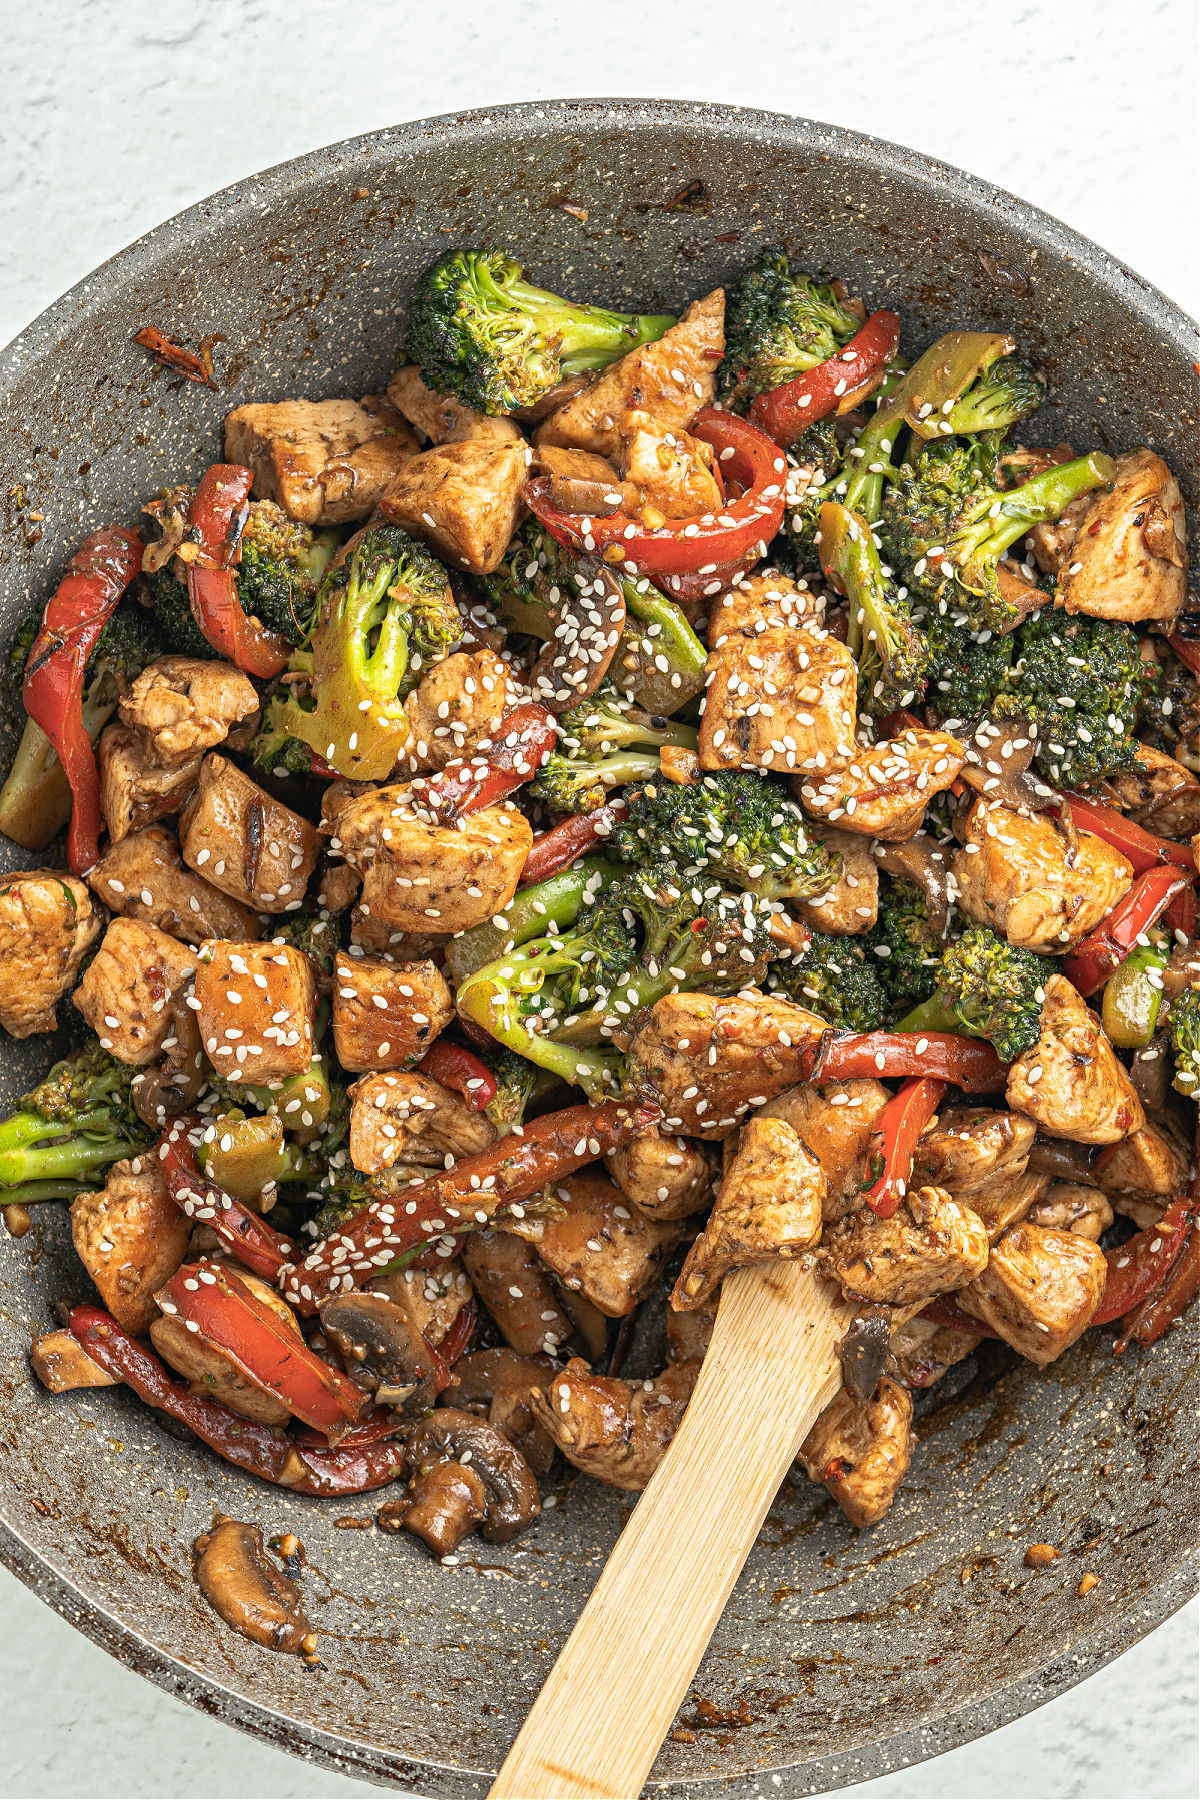 Chicken and vegetable stir fry in a large wok.